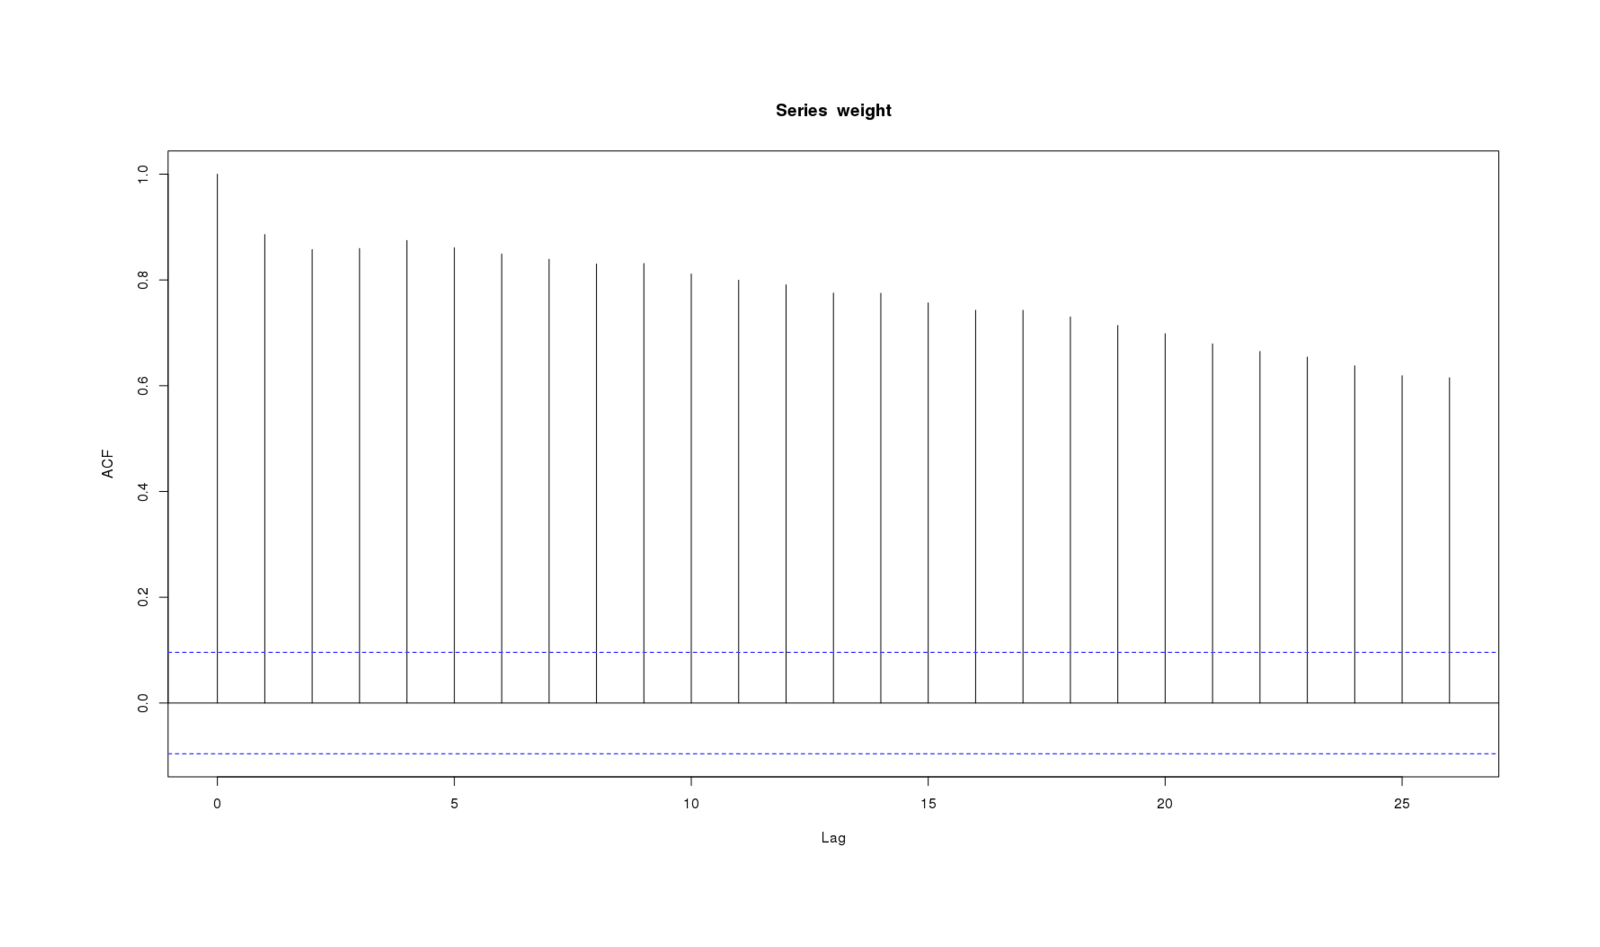 Weight series showing autocorrelation at every timelag